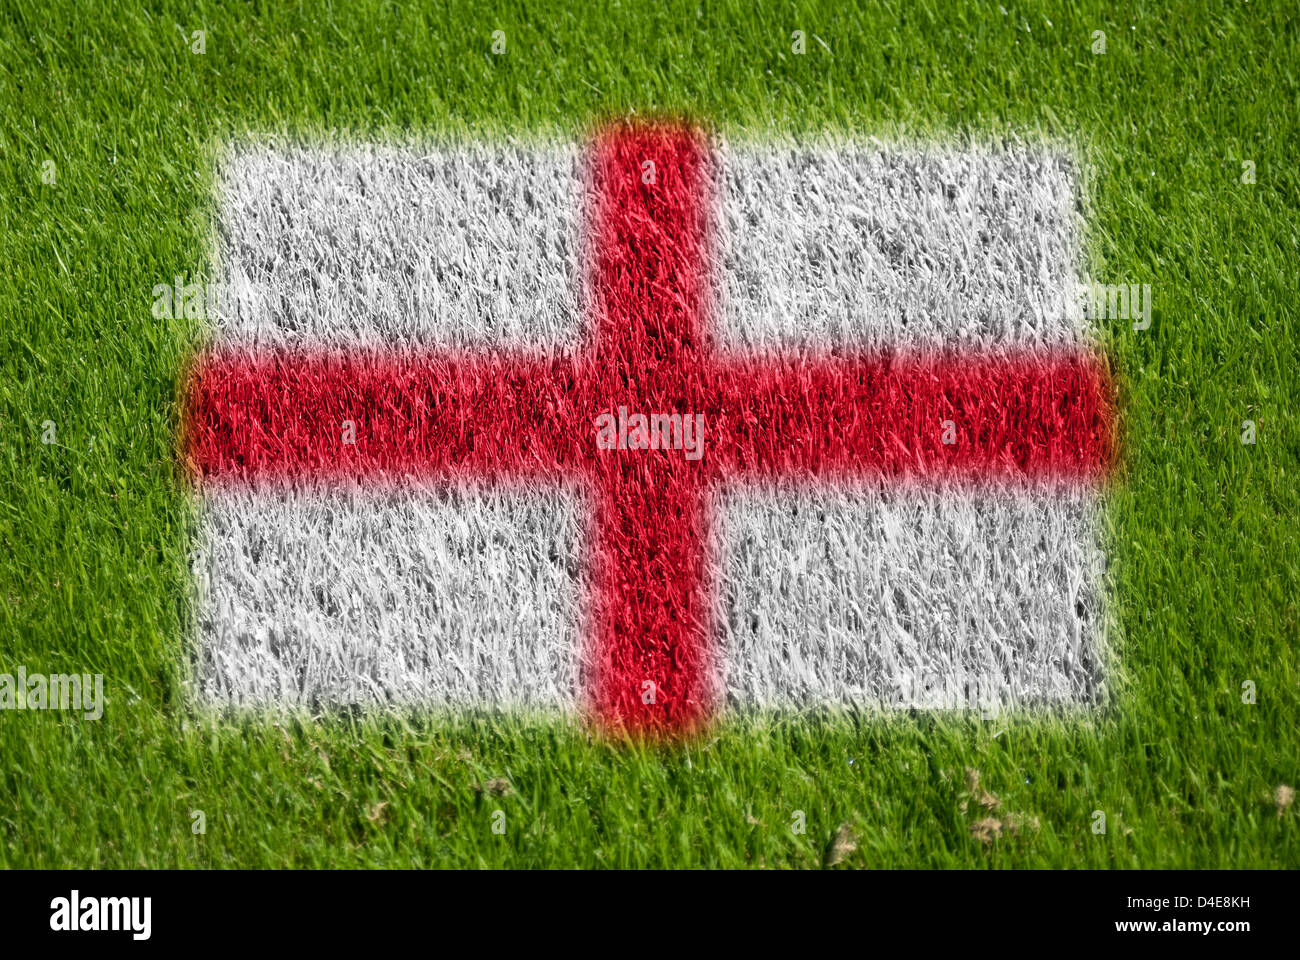 flag of england on grass with spray Stock Photo